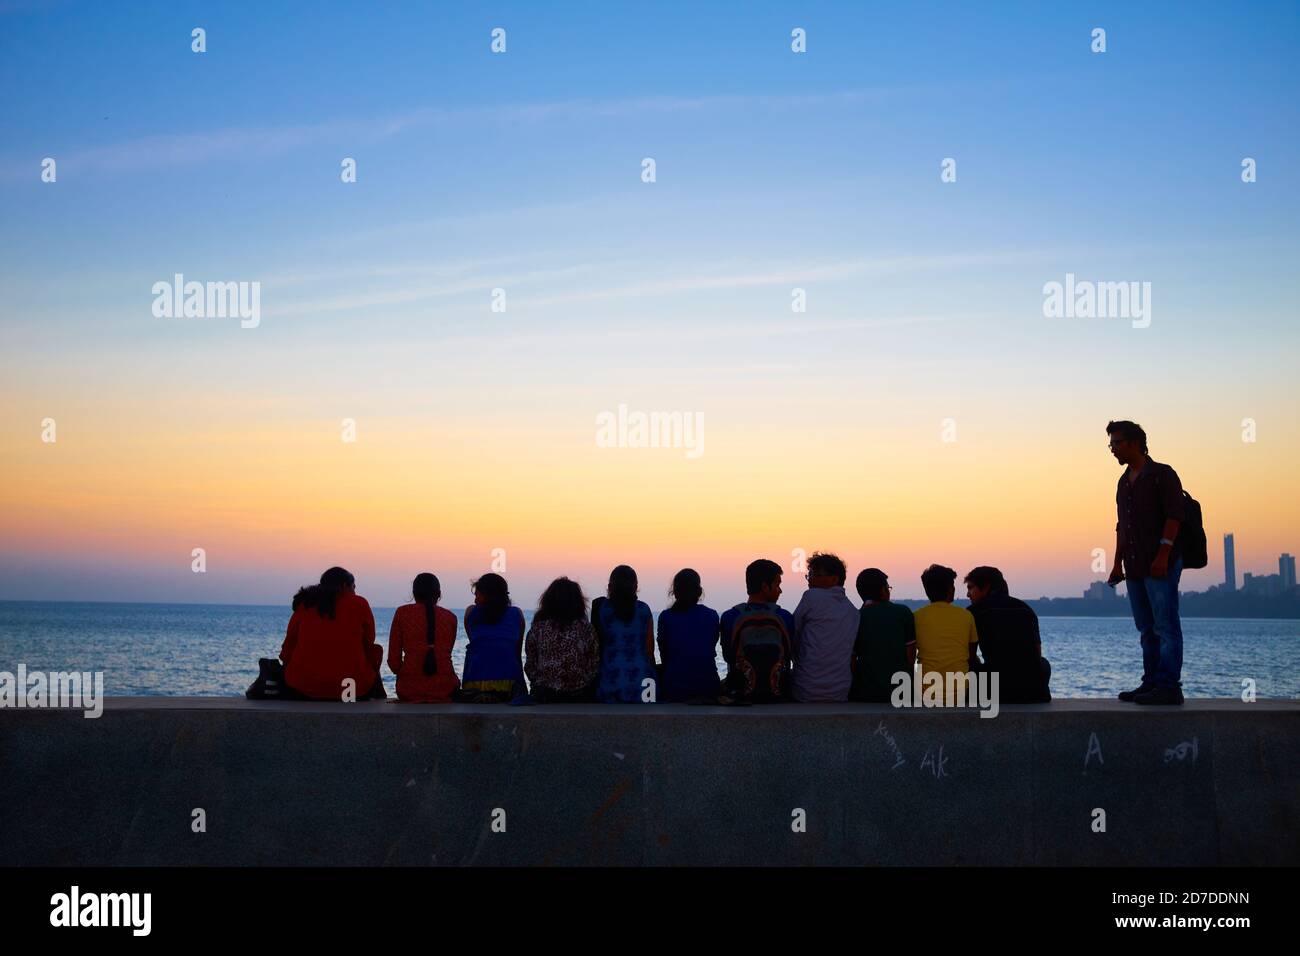 During sunset over the Arabian Sea at Marine Drive, near Chowpatty Beach, Mumbai, a group of sightseers enjoy the view while sitting on the embankment Stock Photo